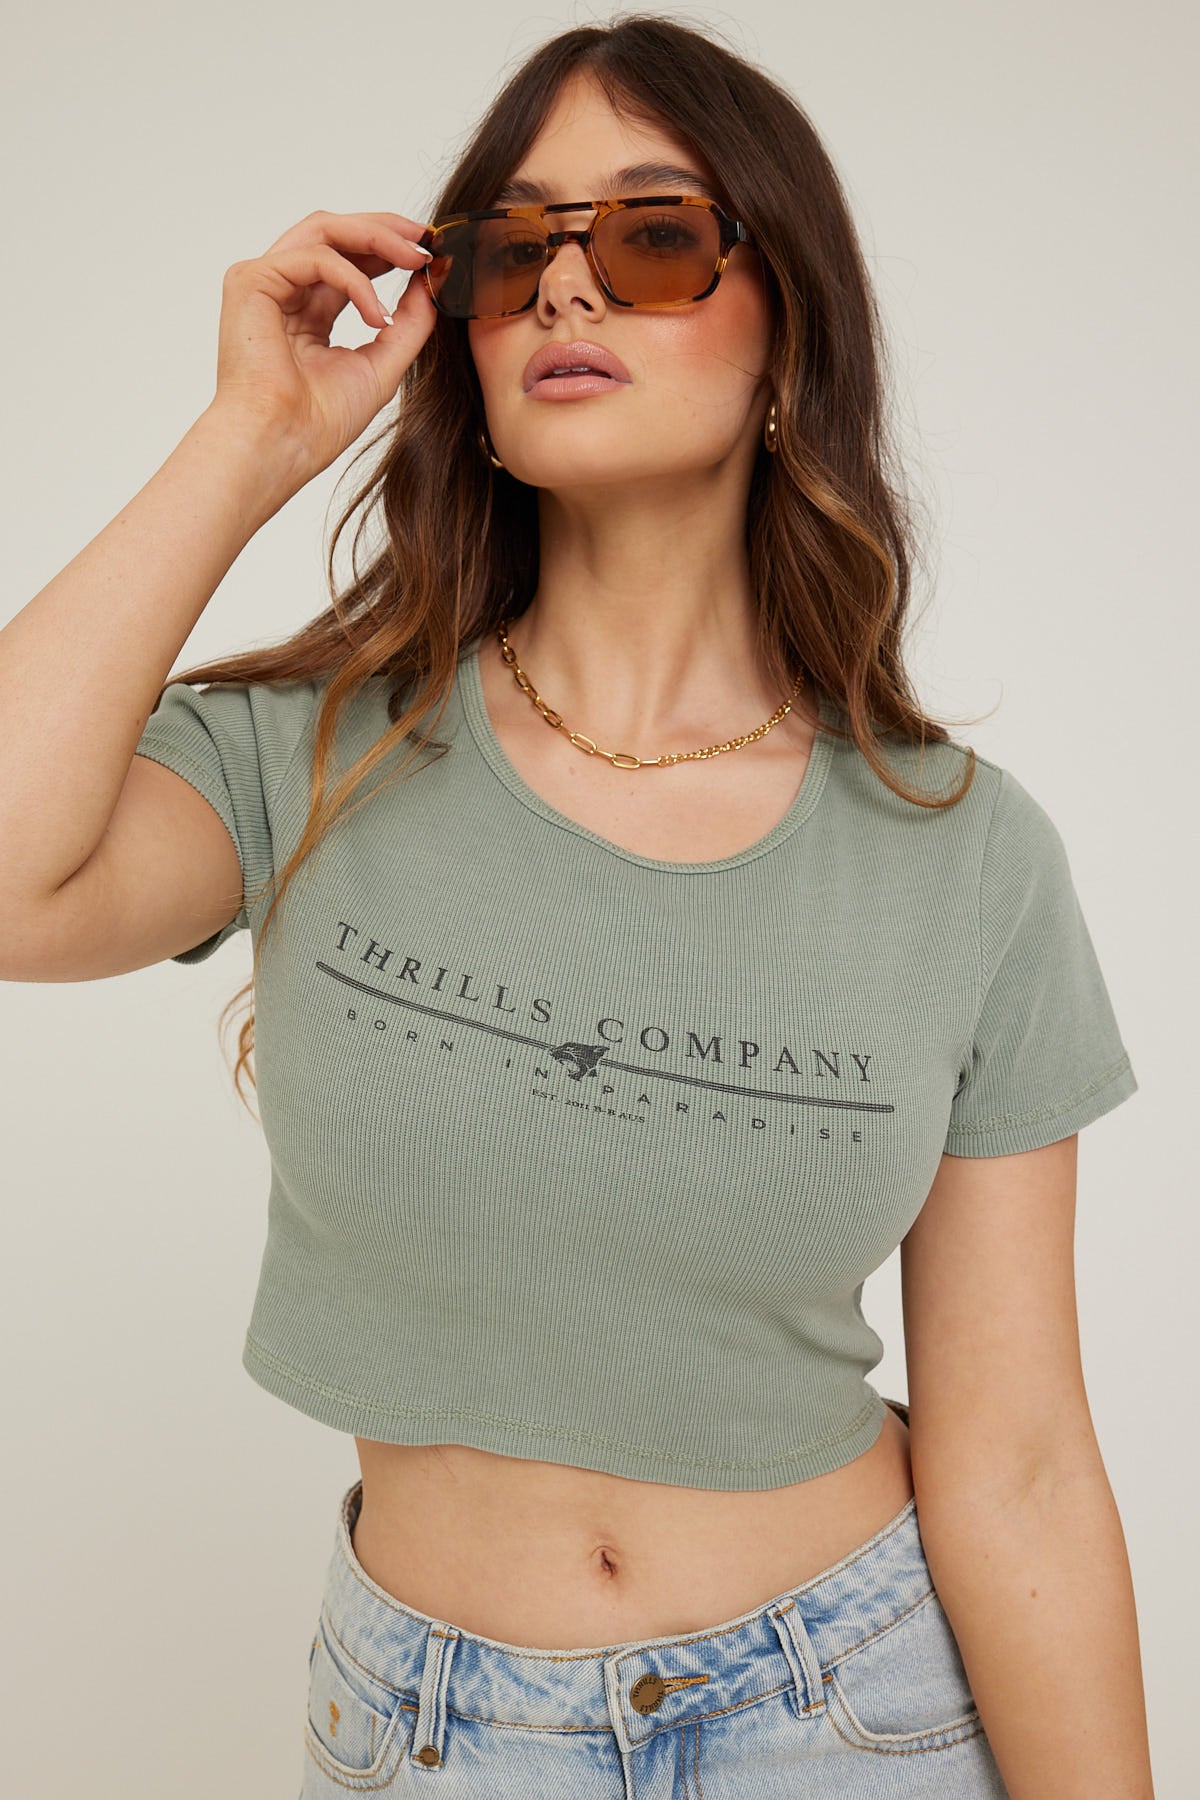 Thrills One For Baby Crop Tee Sea Glass